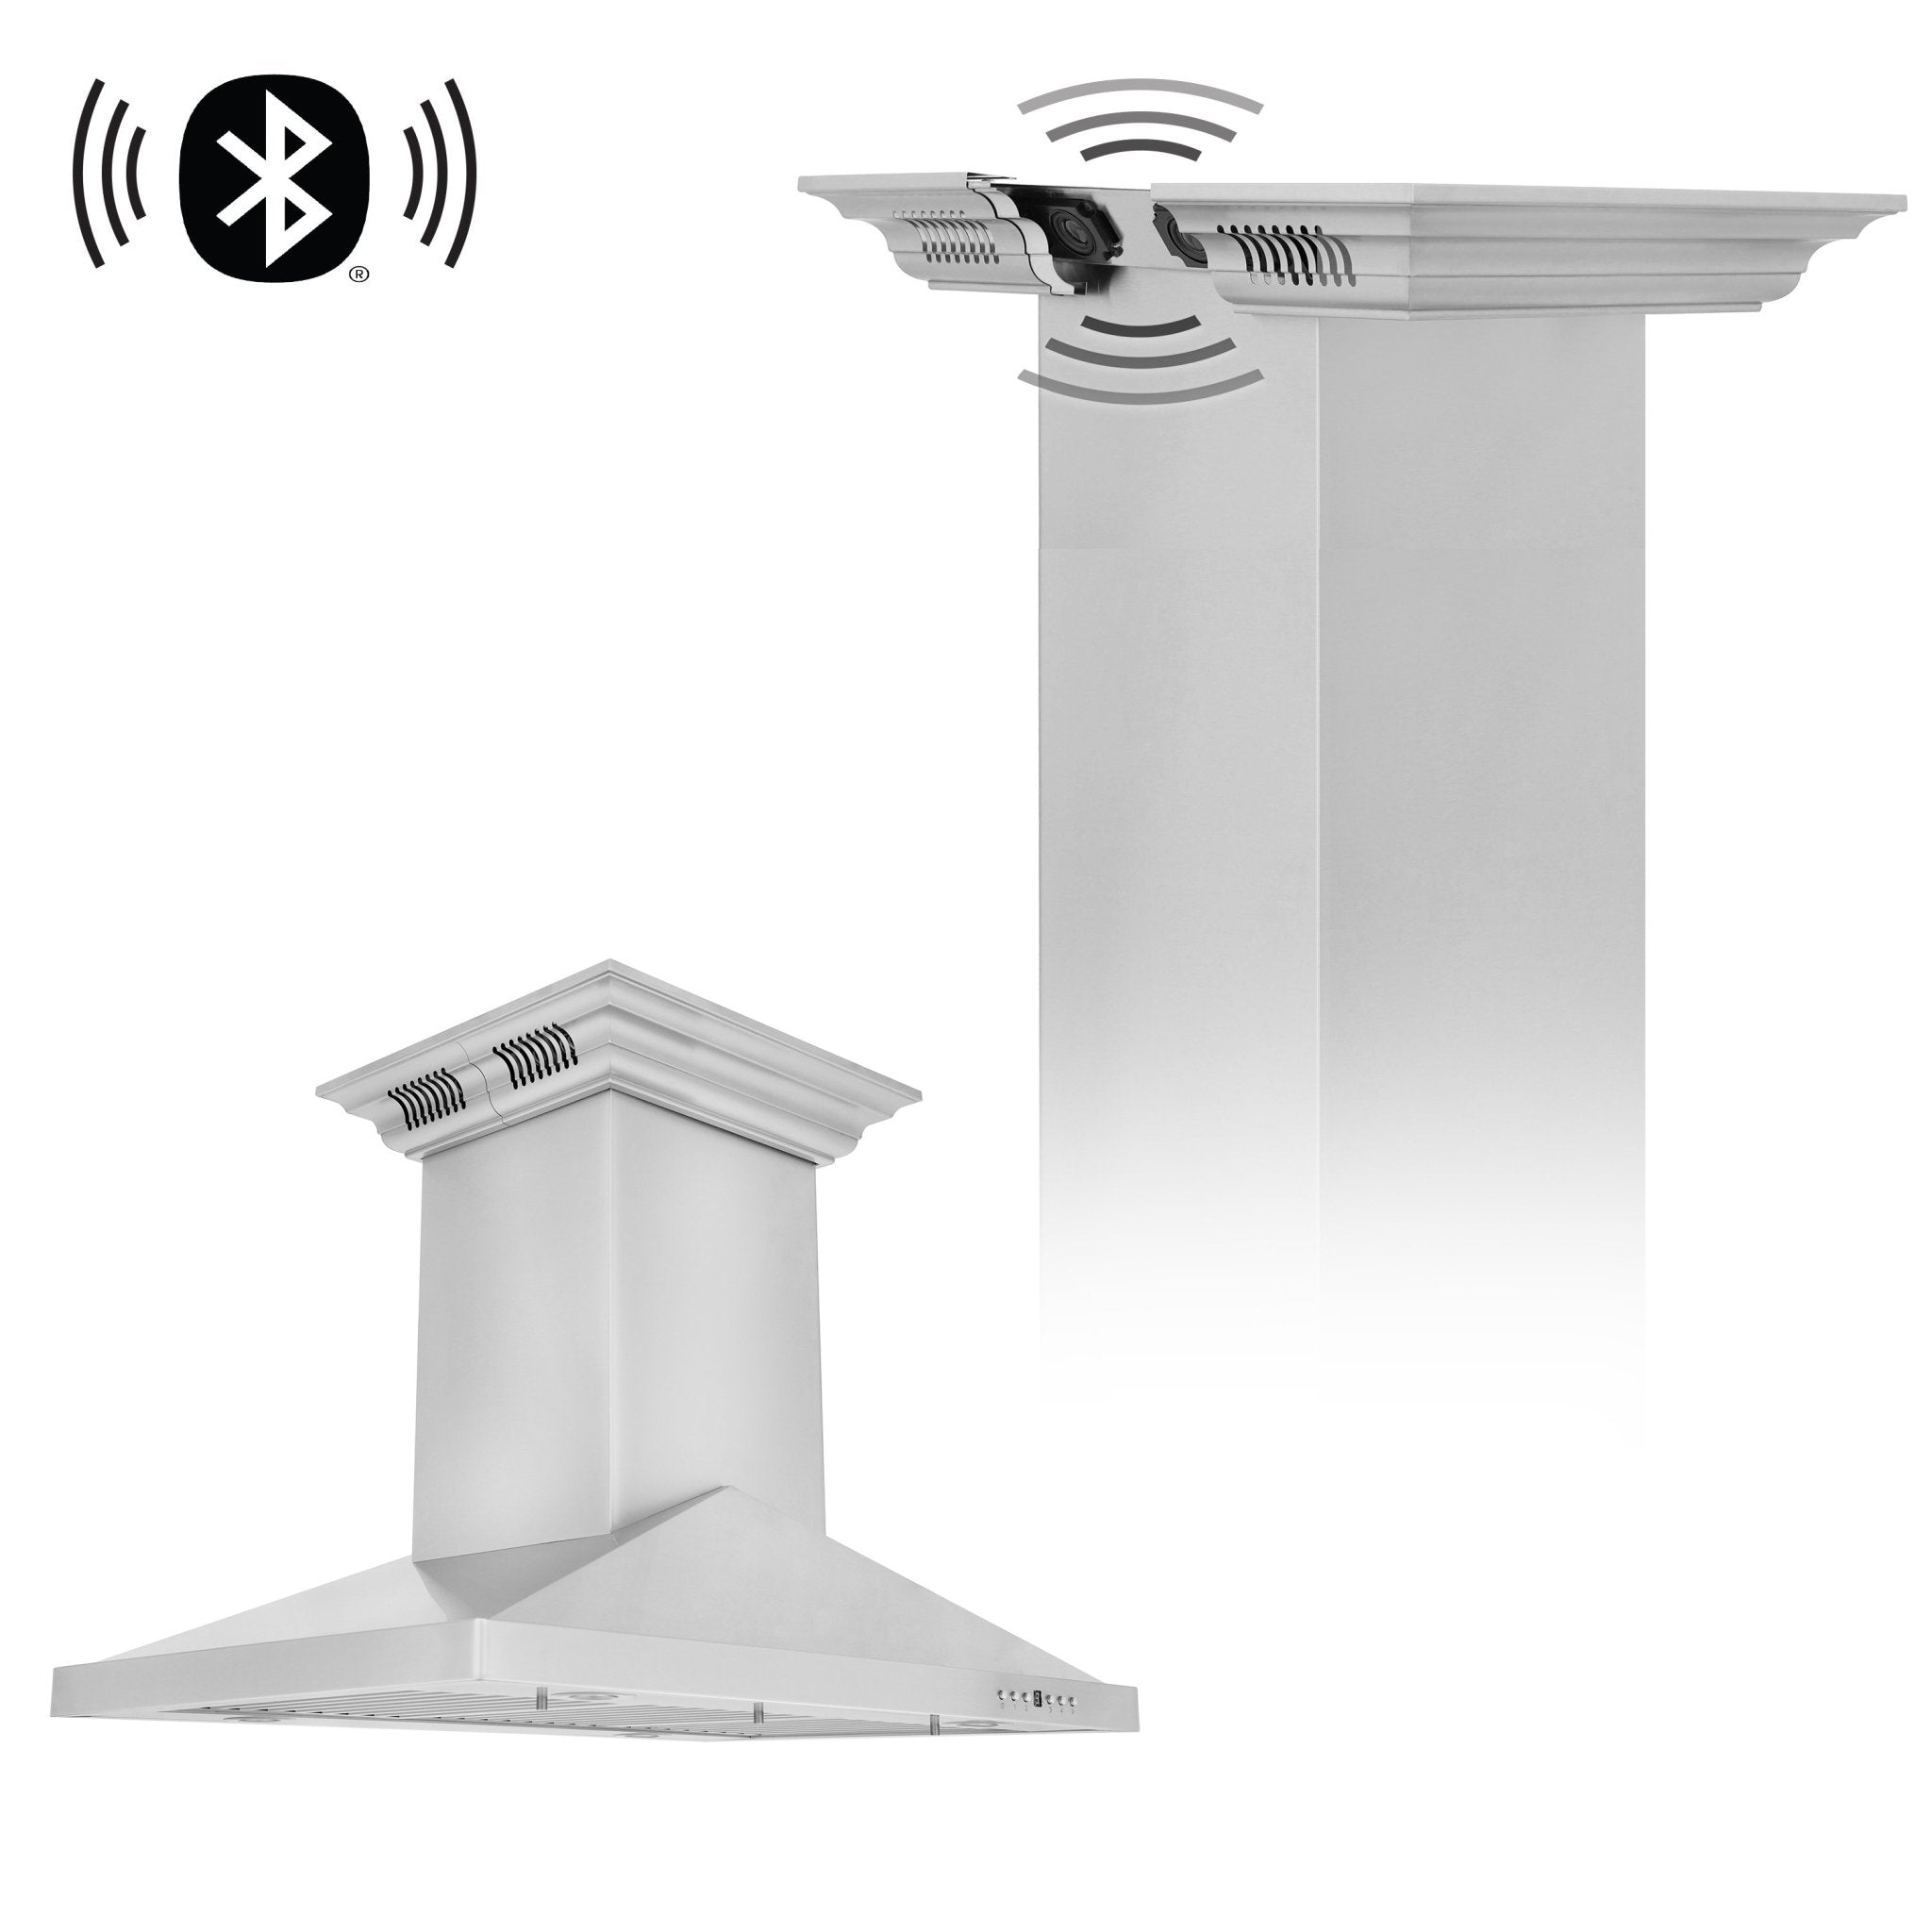 ZLINE 697CRN-BT 36 Professional Wall Mount Range Hood in Stainless Steel with Built-In CrownSound Bluetooth Speakers